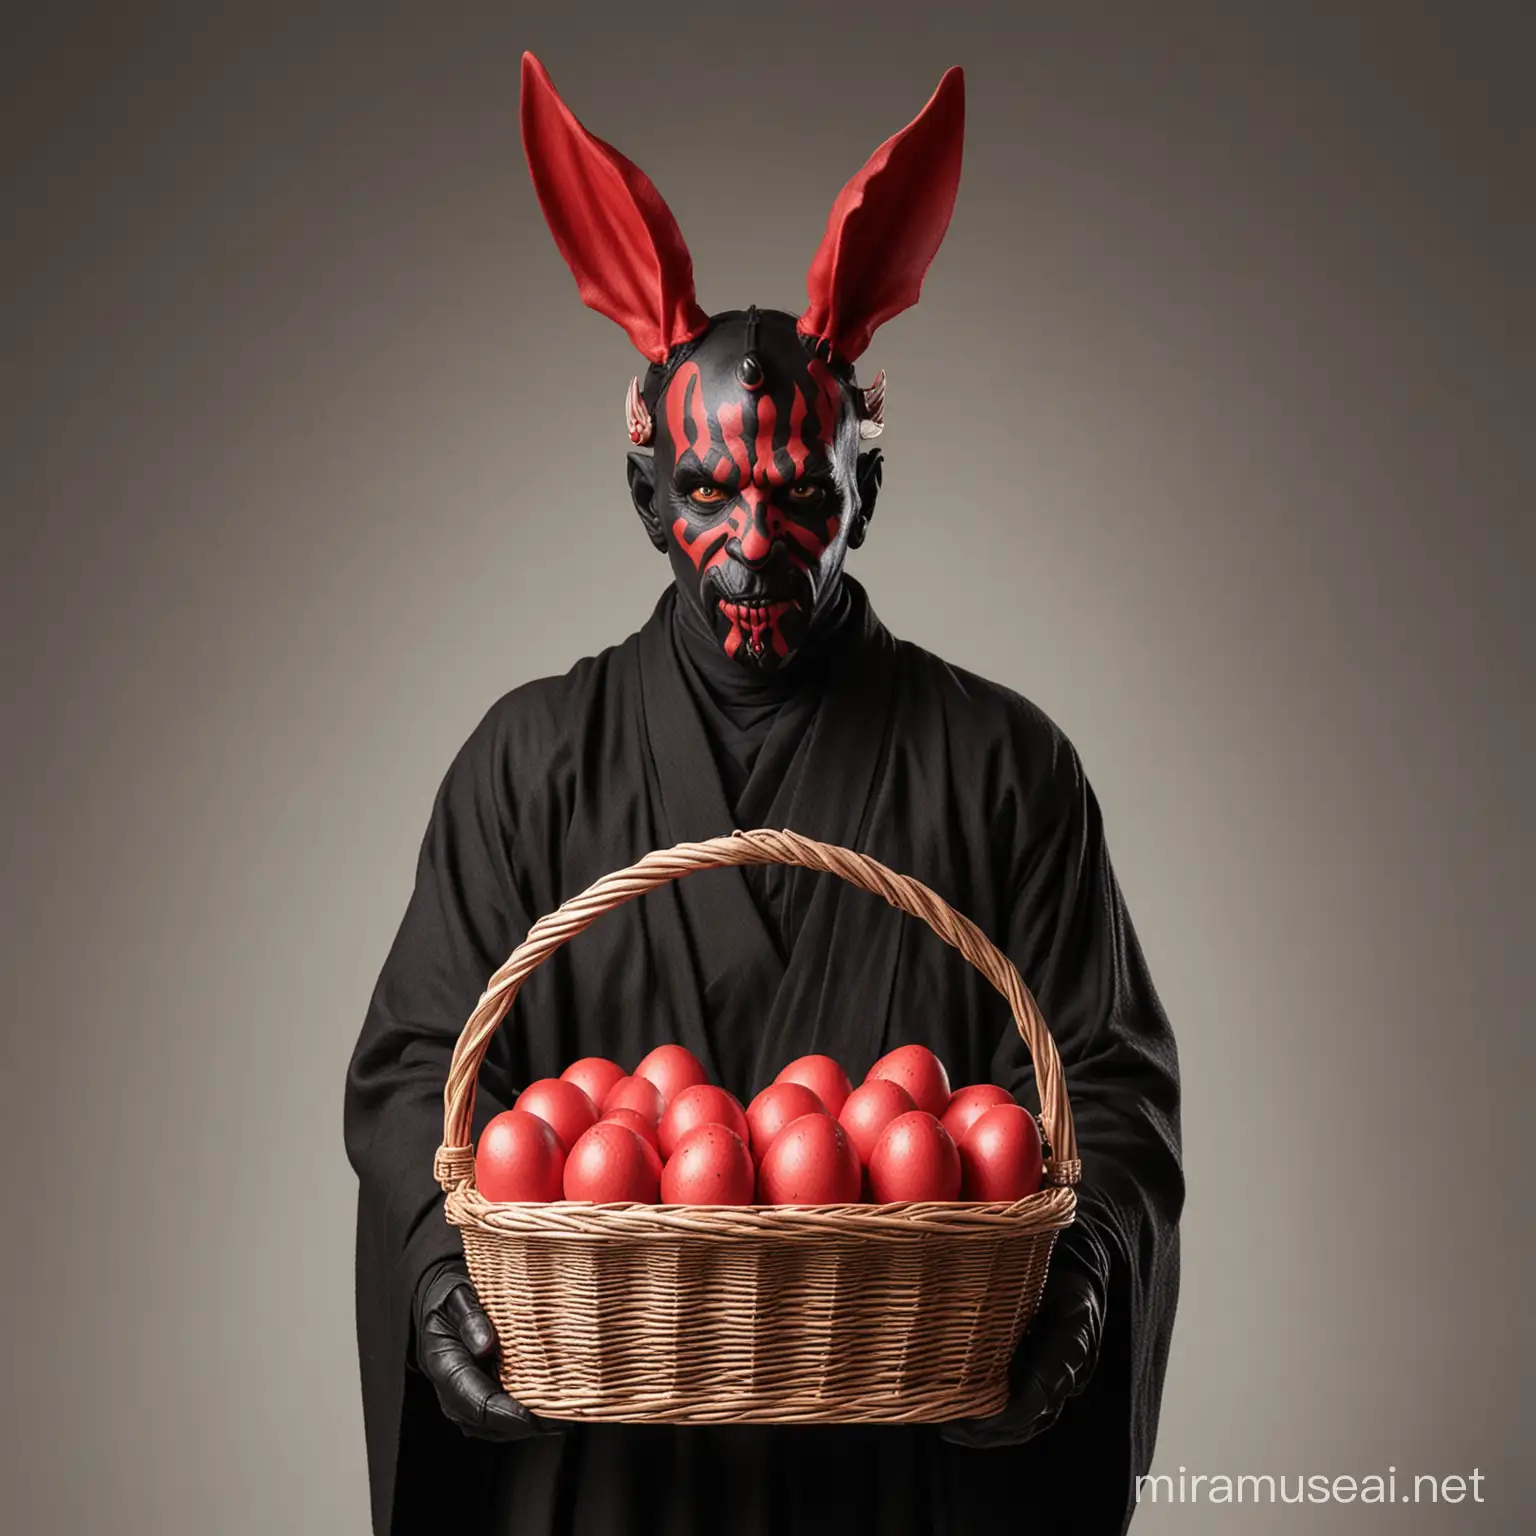 Darth Maul with bunny ears, holding a basket full of red eggs